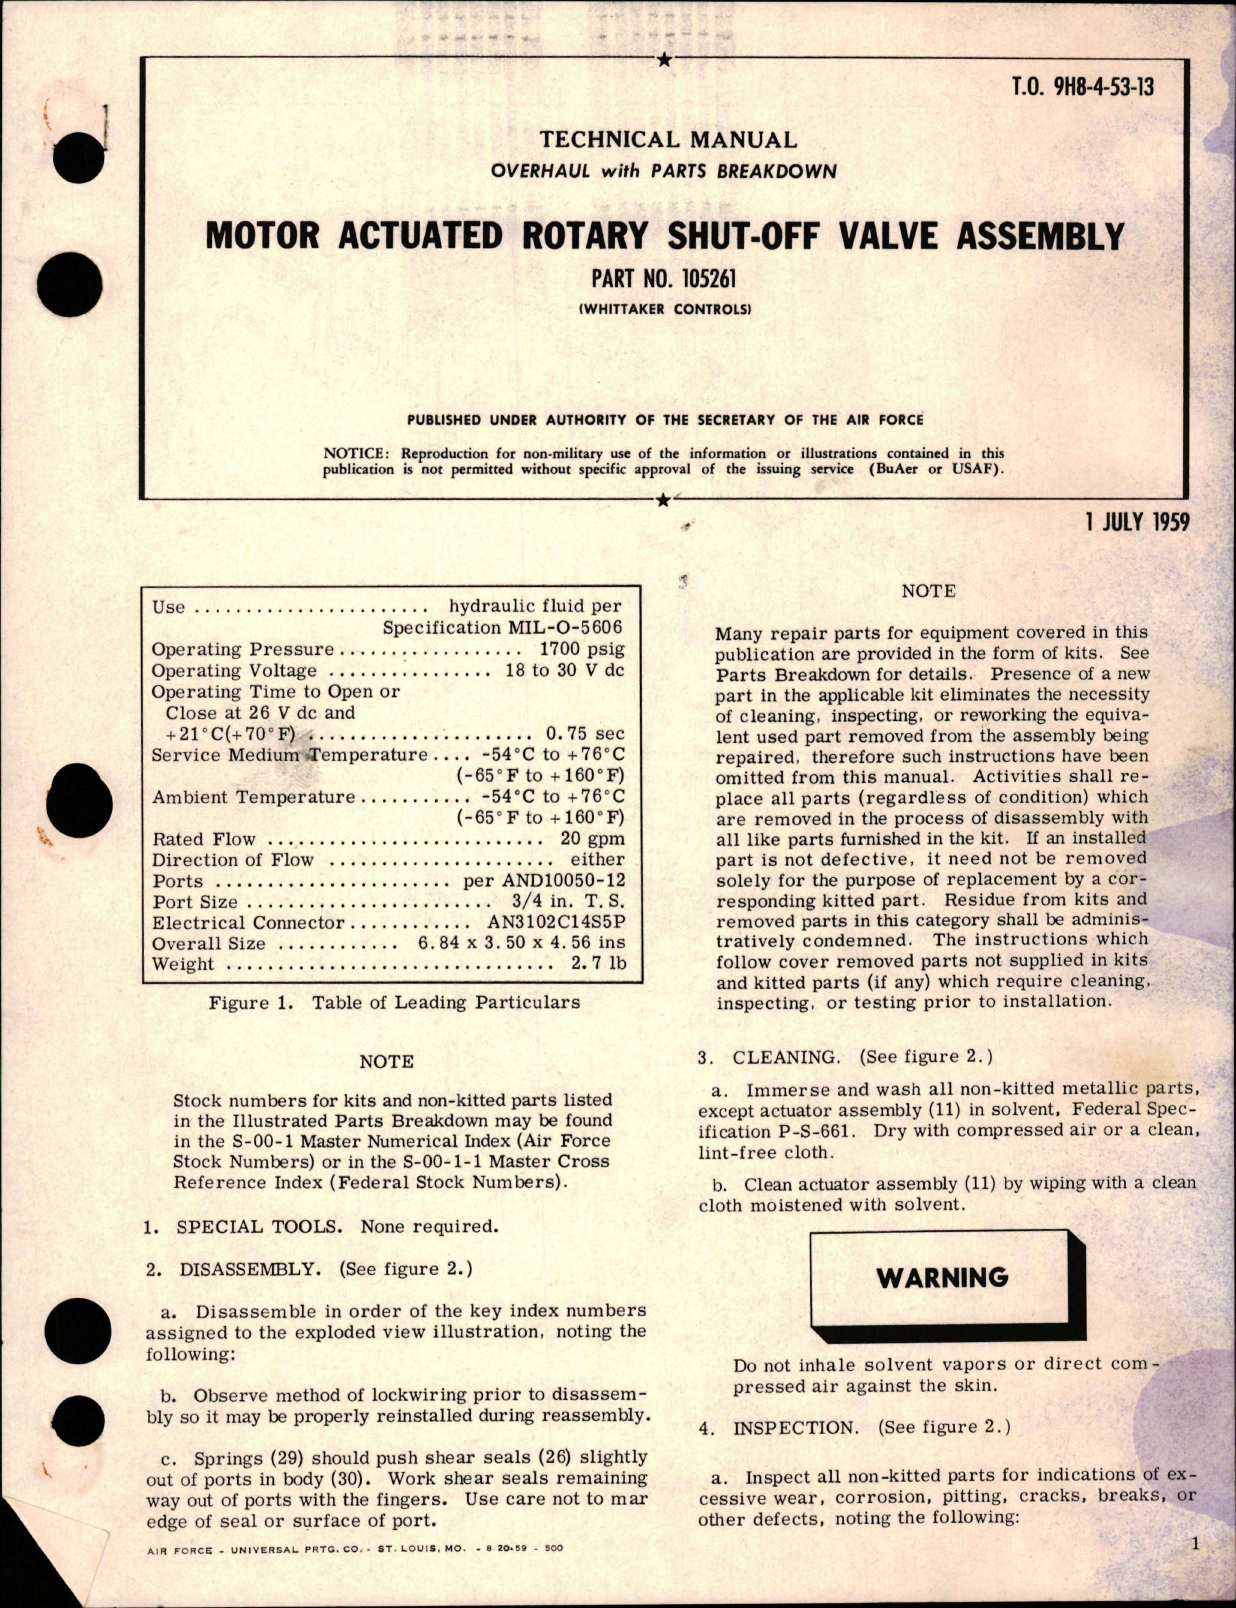 Sample page 1 from AirCorps Library document: Overhaul with Parts Breakdown for Motor Actuated Rotary Shut-Off Valve Assembly - Part 105261 